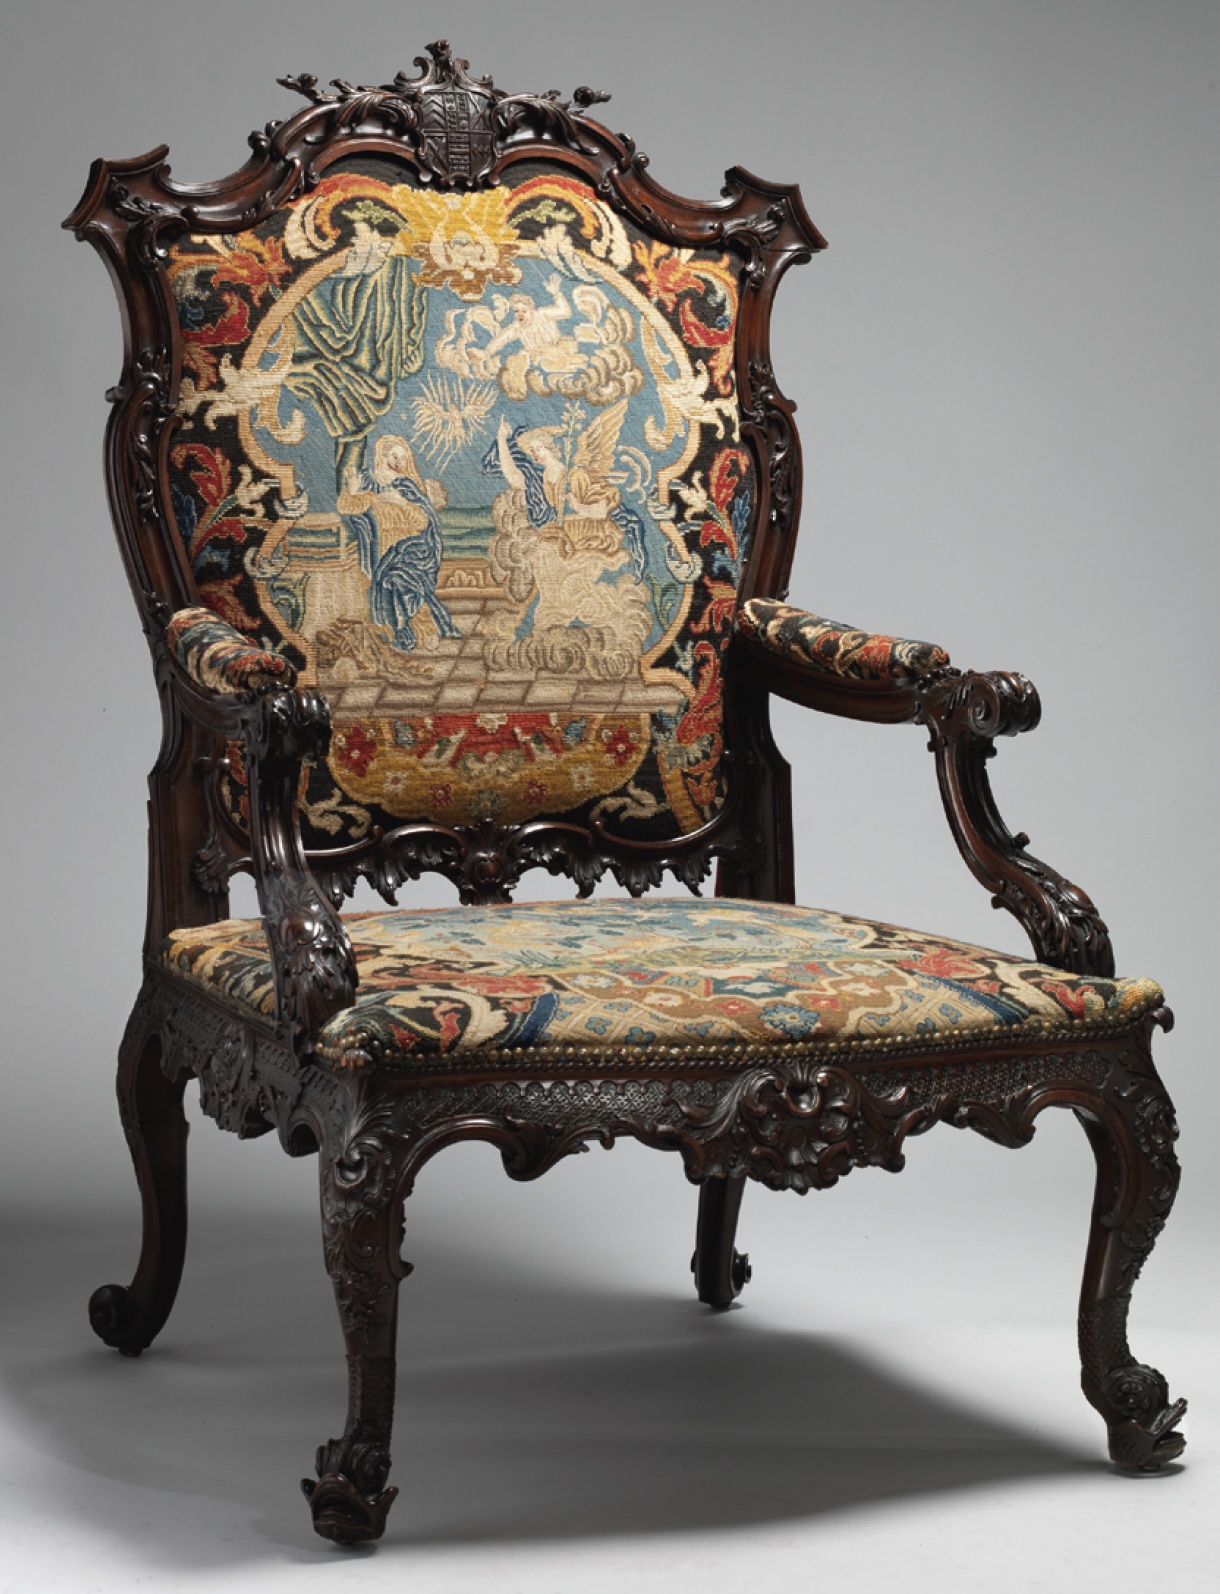 Armchair, c. 1755, after a design by Thomas Chippendale described as a “French chair” in The Gentleman and Cabinet-Maker’s Director